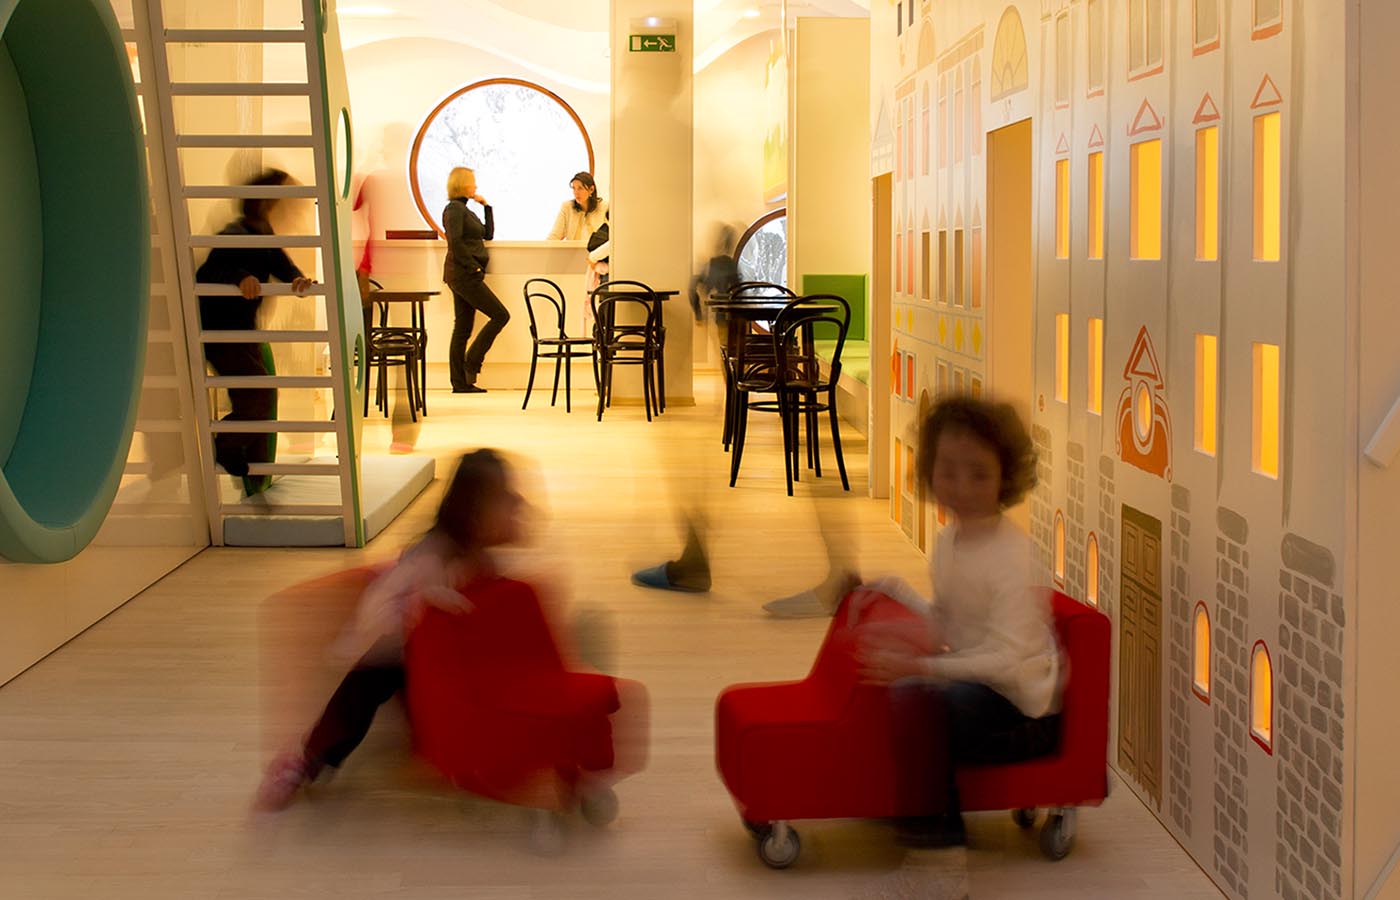 The interior of Mala ulica with colorful walls, red armchairs and cheerful children.